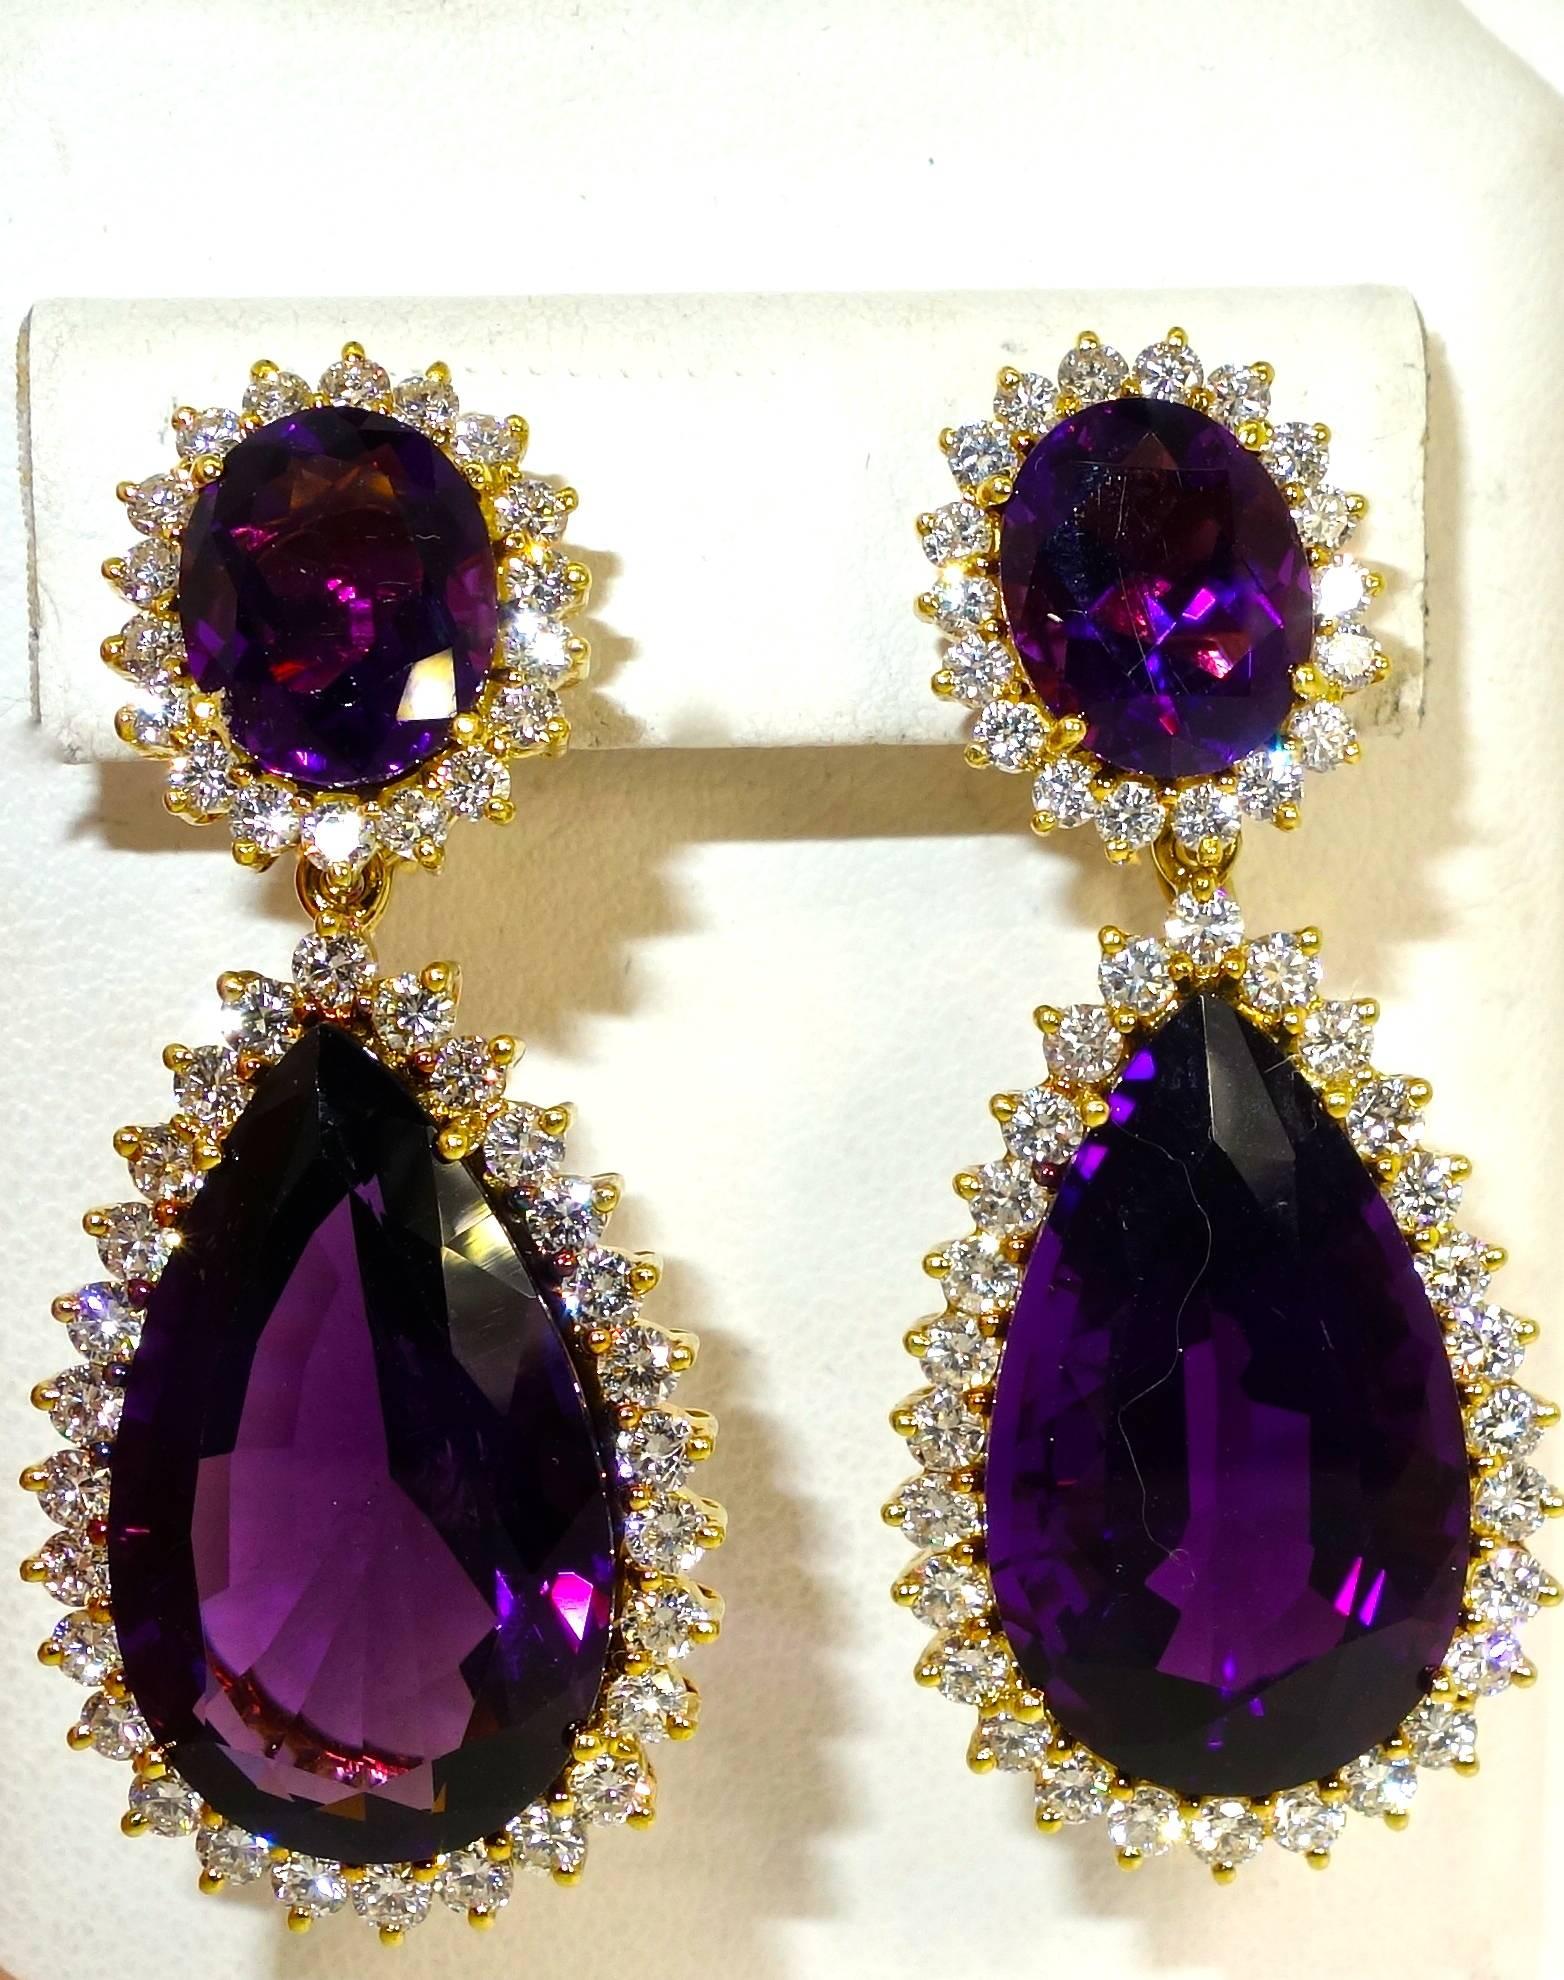 Fine deep purple amethysts - well matched, and weighing approximately 30 cts., accented with approximately 2.75 cts of white brilliant cut diamonds.  Marked 750 European mark for 18K.  Just over 1.5 inches long.  The bottom pear cut drops can be